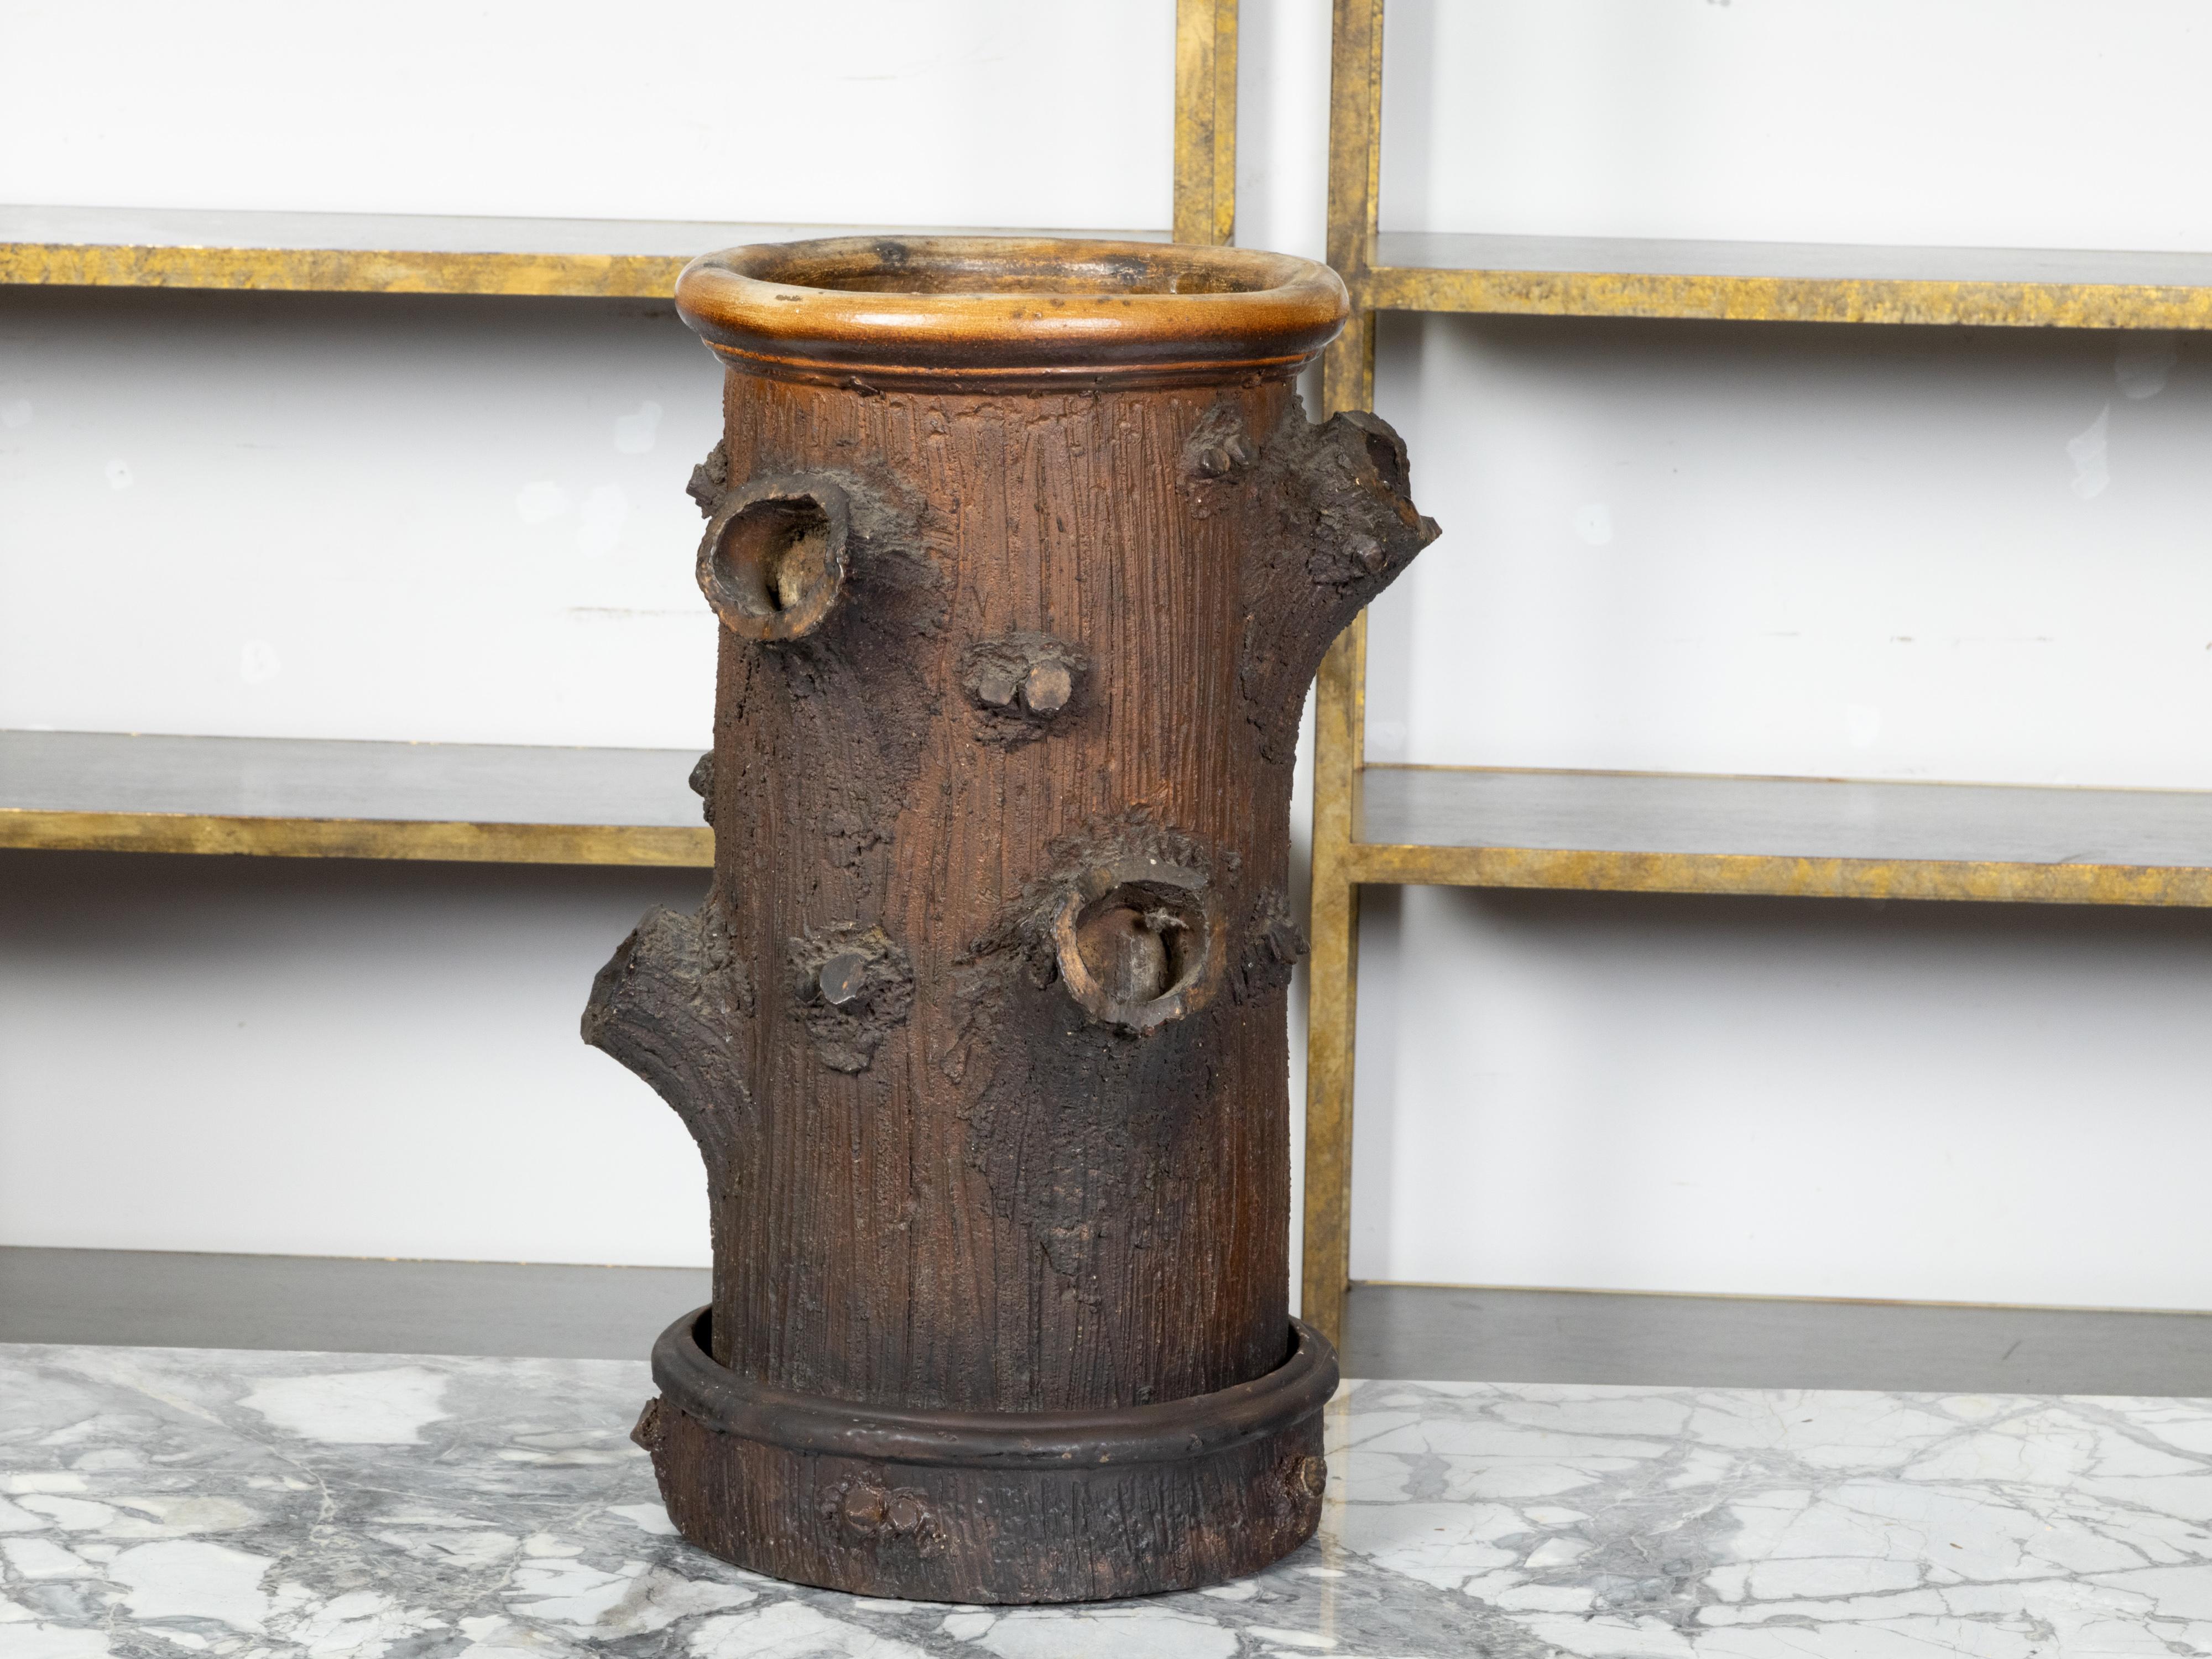 Painted Rustic English Terracotta Faux Bois Umbrella Stand Depicting a Tree Trunk